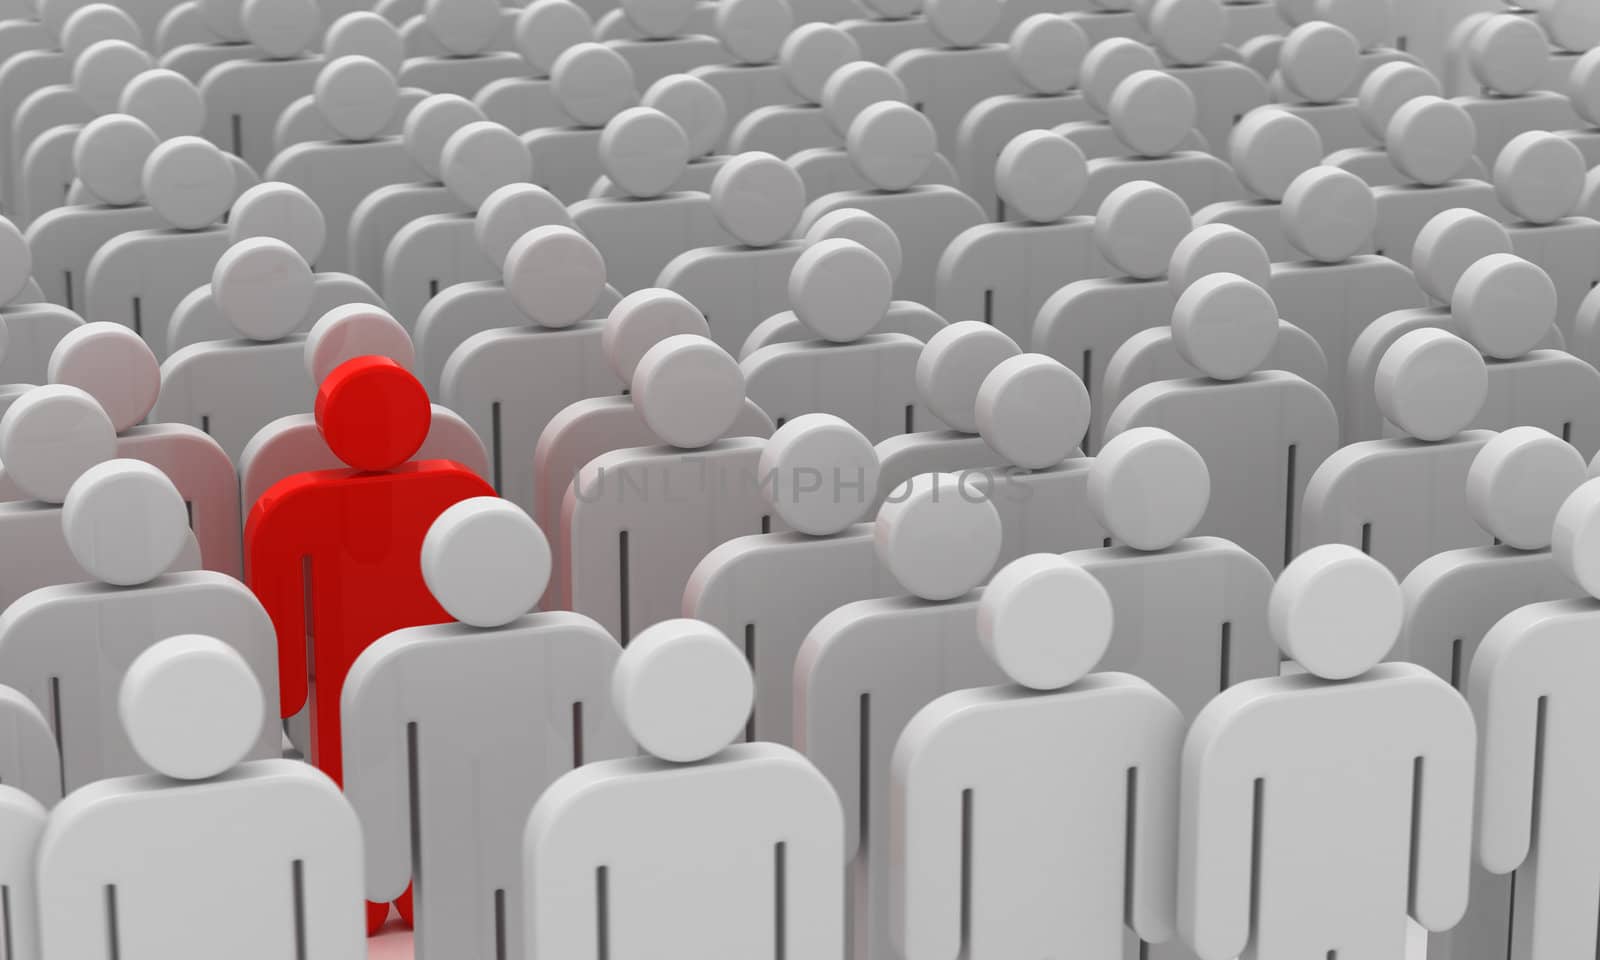 One red human figure in the crowd of white human figures